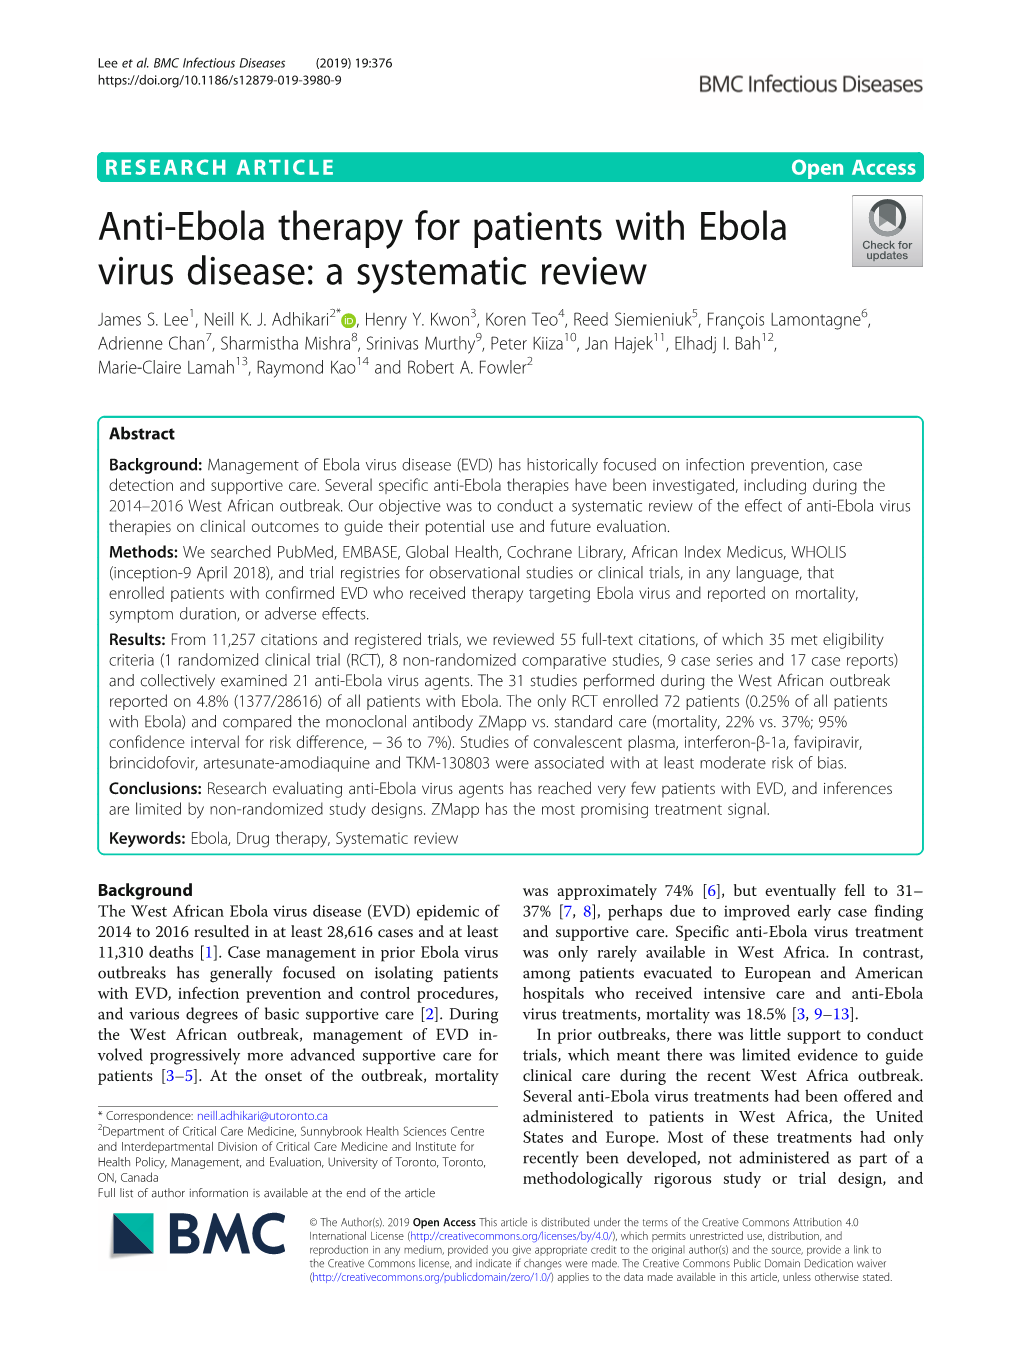 Anti-Ebola Therapy for Patients with Ebola Virus Disease: a Systematic Review James S